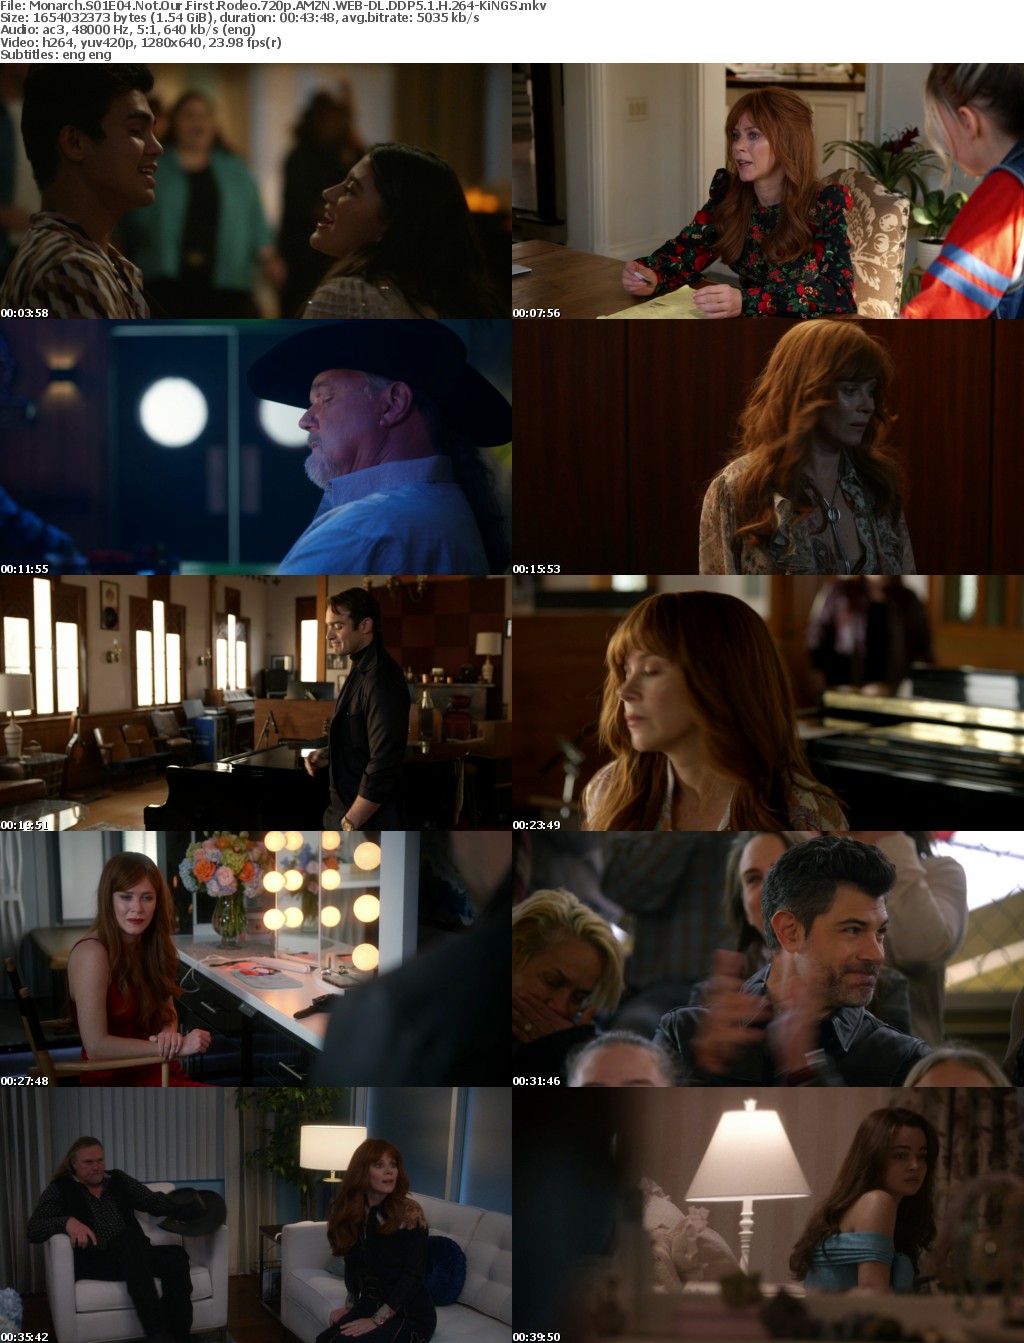 Monarch S01E04 Not Our First Rodeo 720p AMZN WEBRip DDP5 1 x264-KiNGS